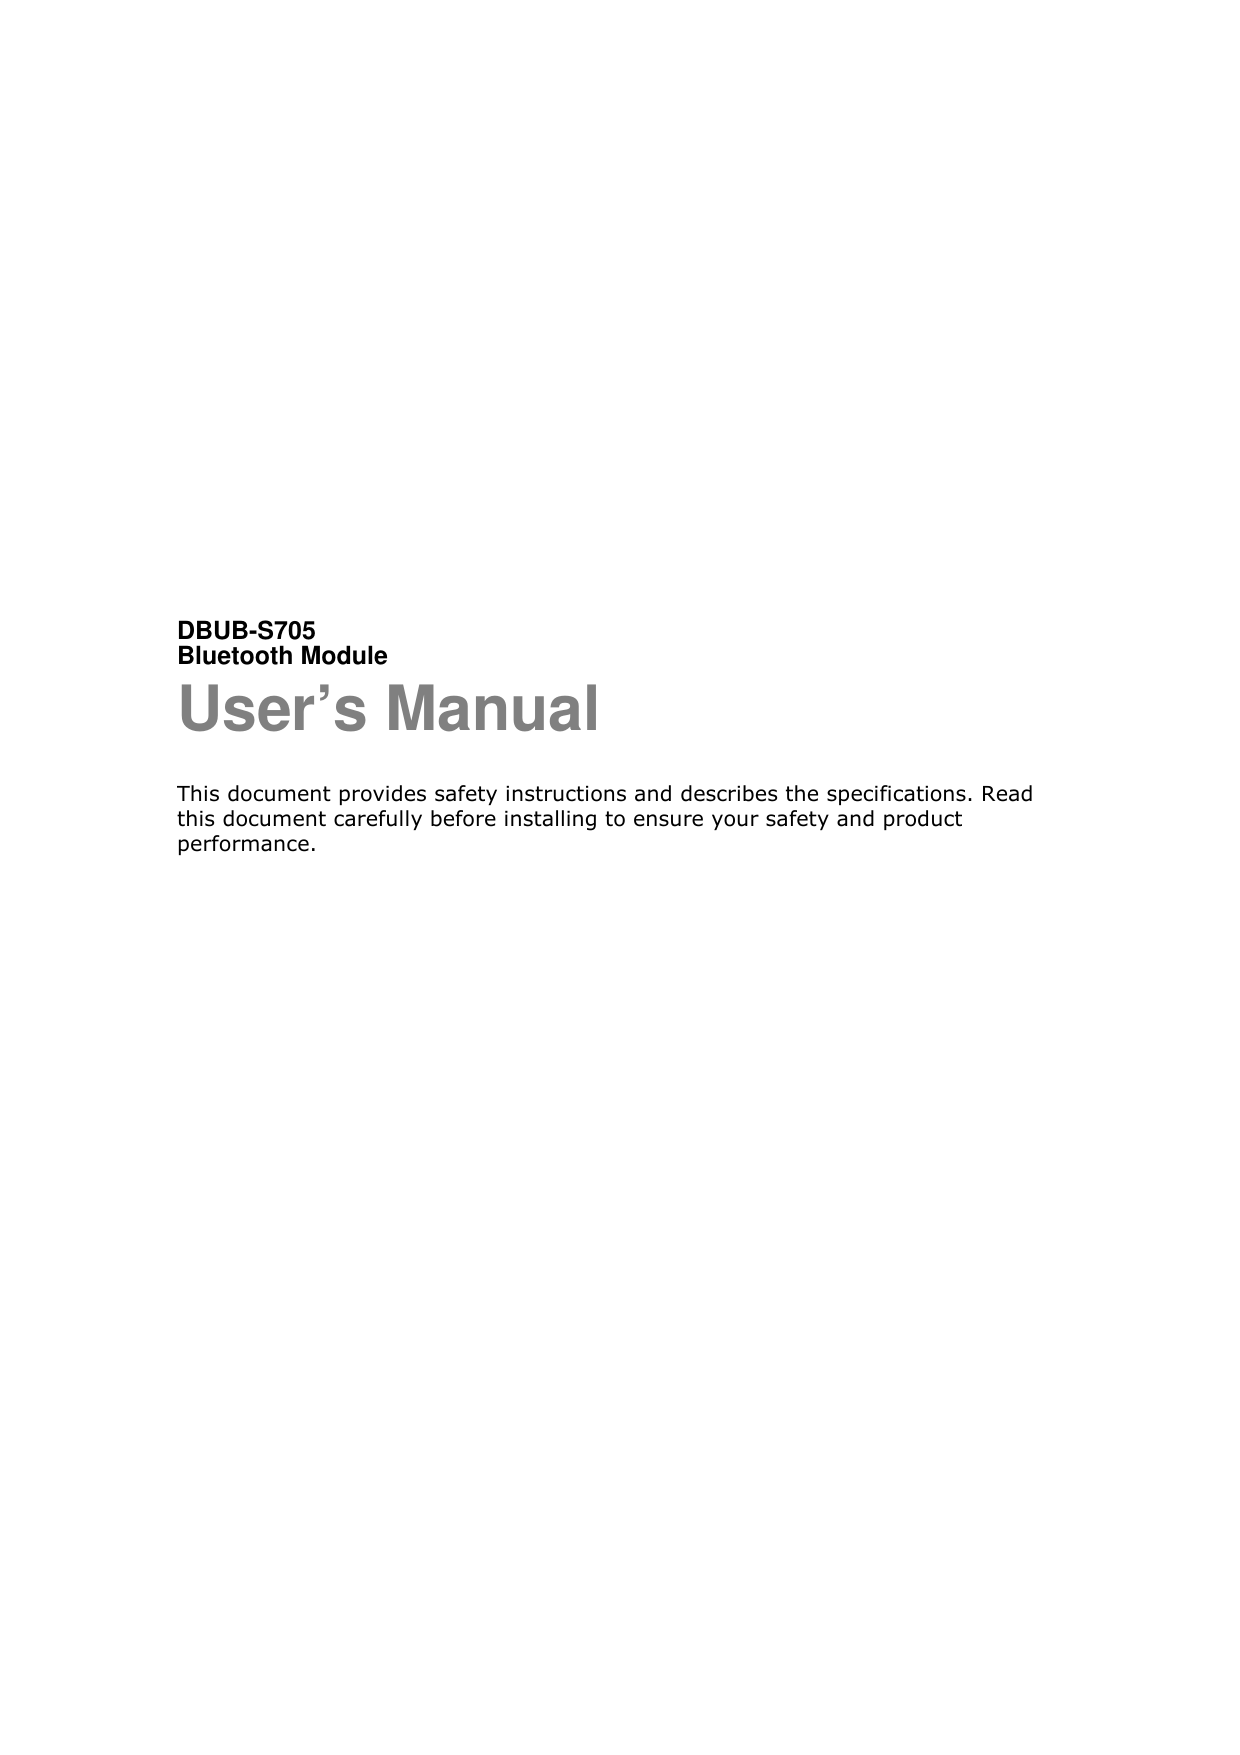            DBUB-S705 Bluetooth Module   User’s Manual This document provides safety instructions and describes the specifications. Read this document carefully before installing to ensure your safety and product performance.    